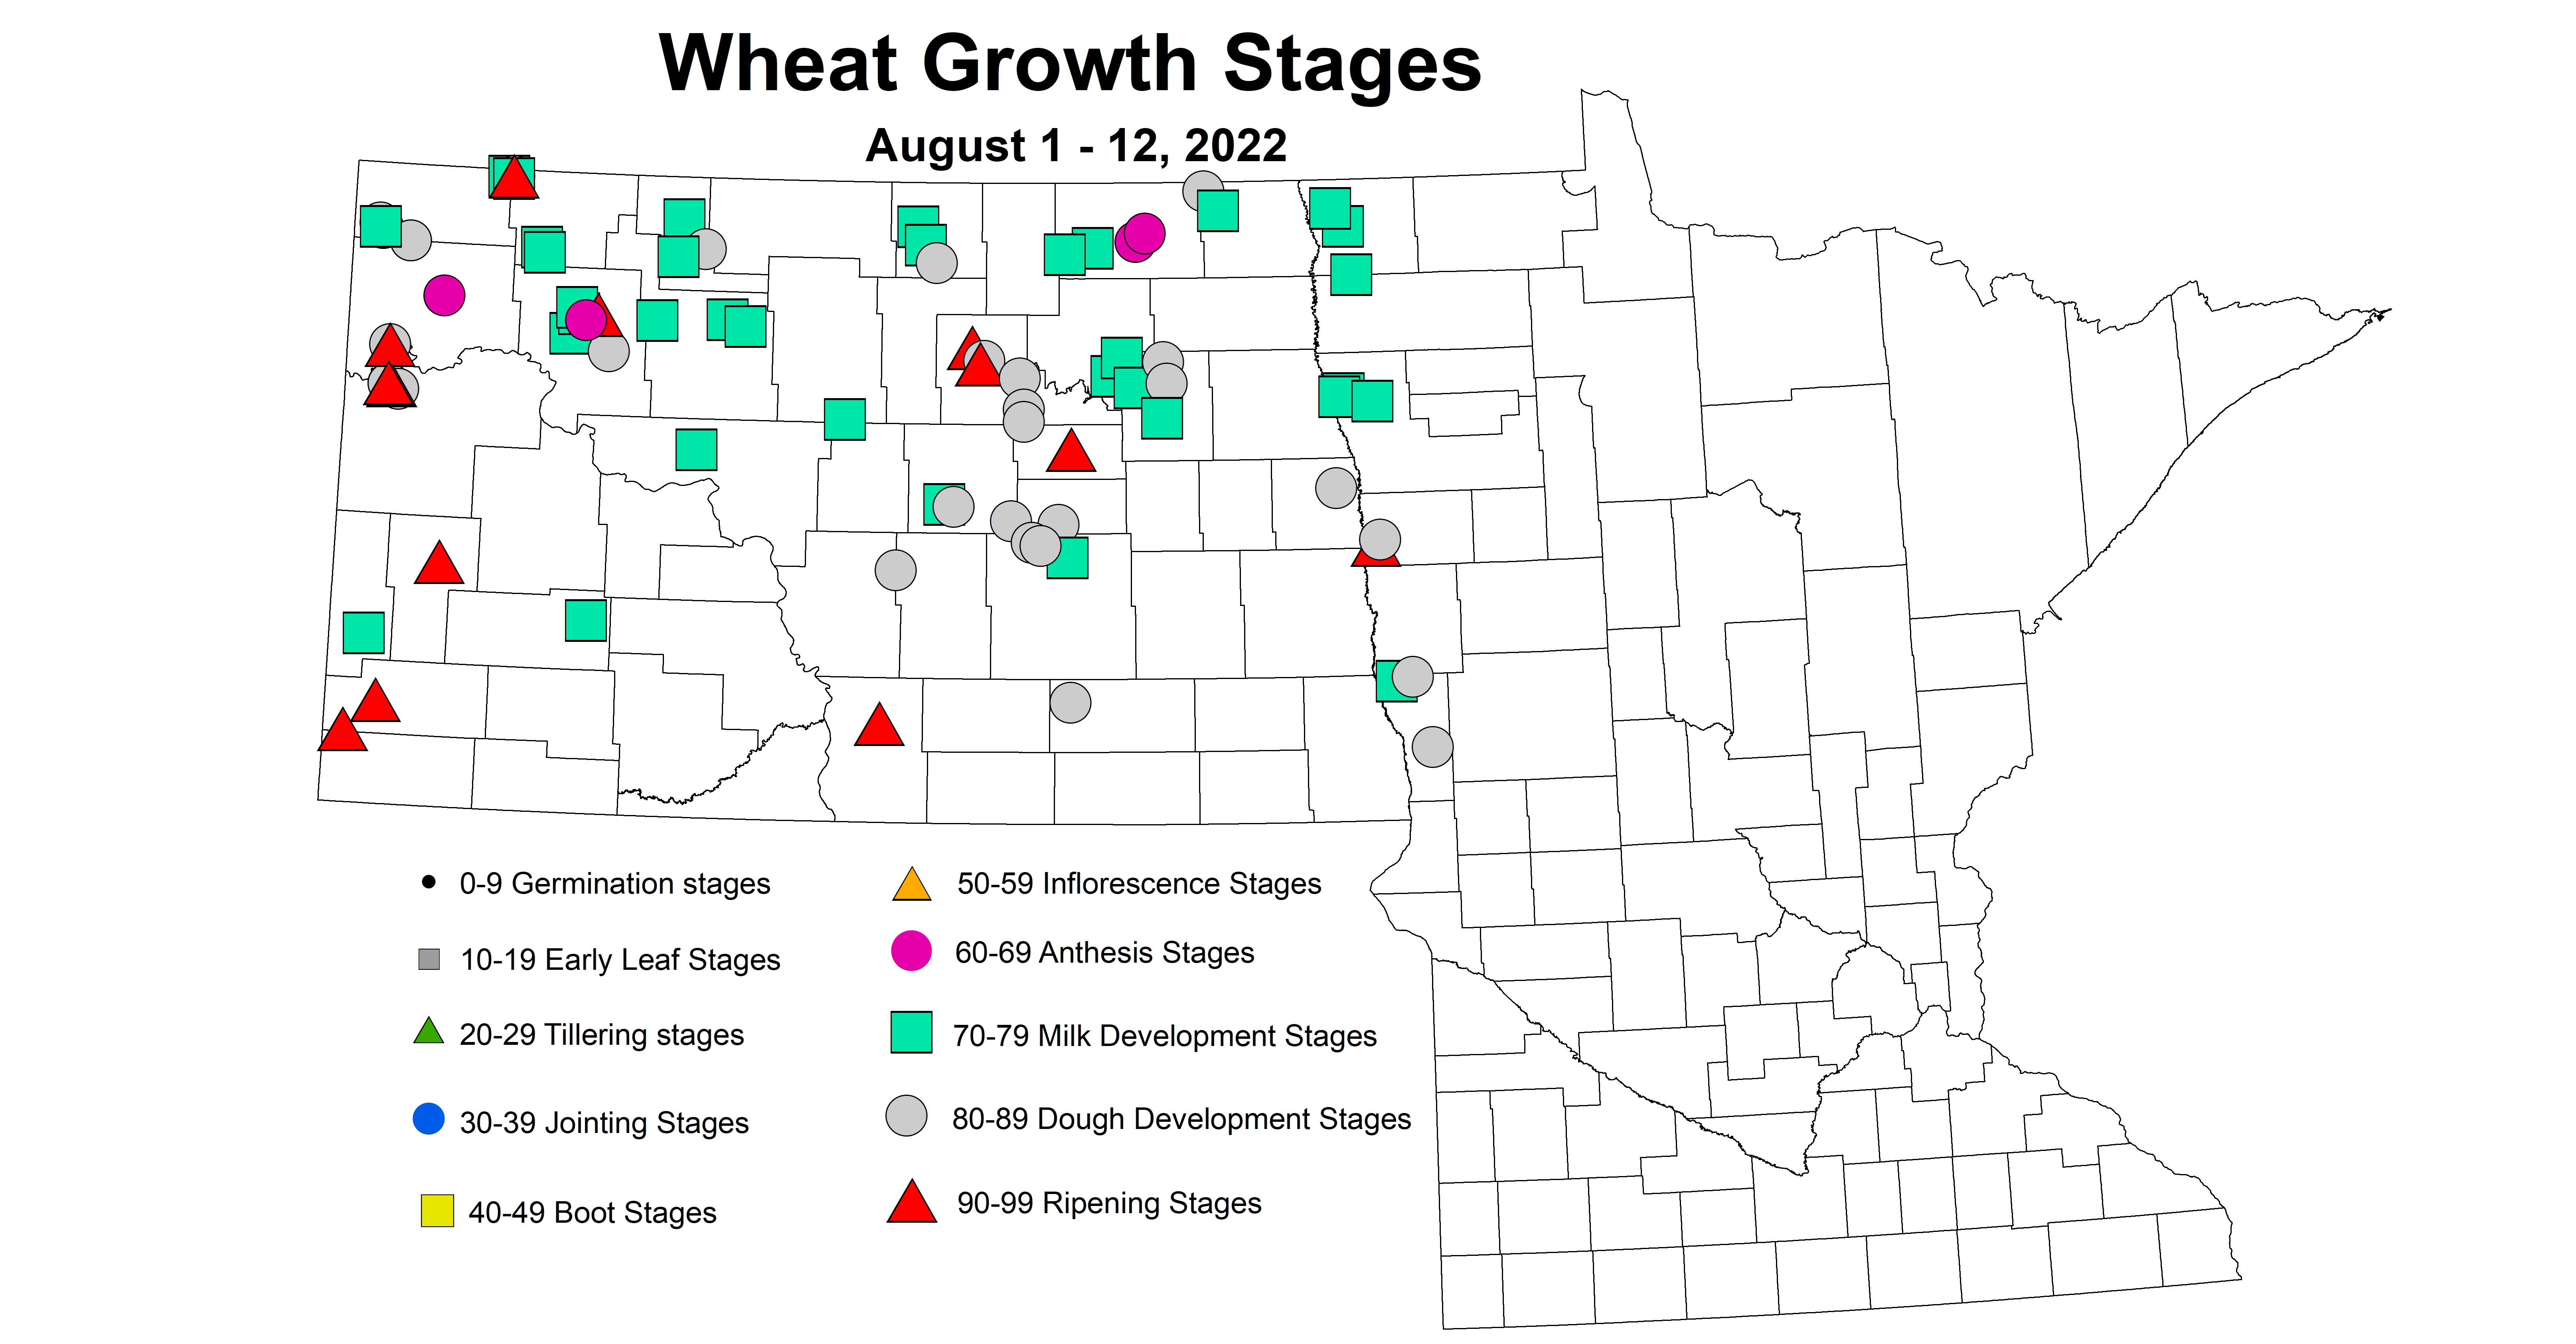 wheat growth stages 2022 8.1-8.12